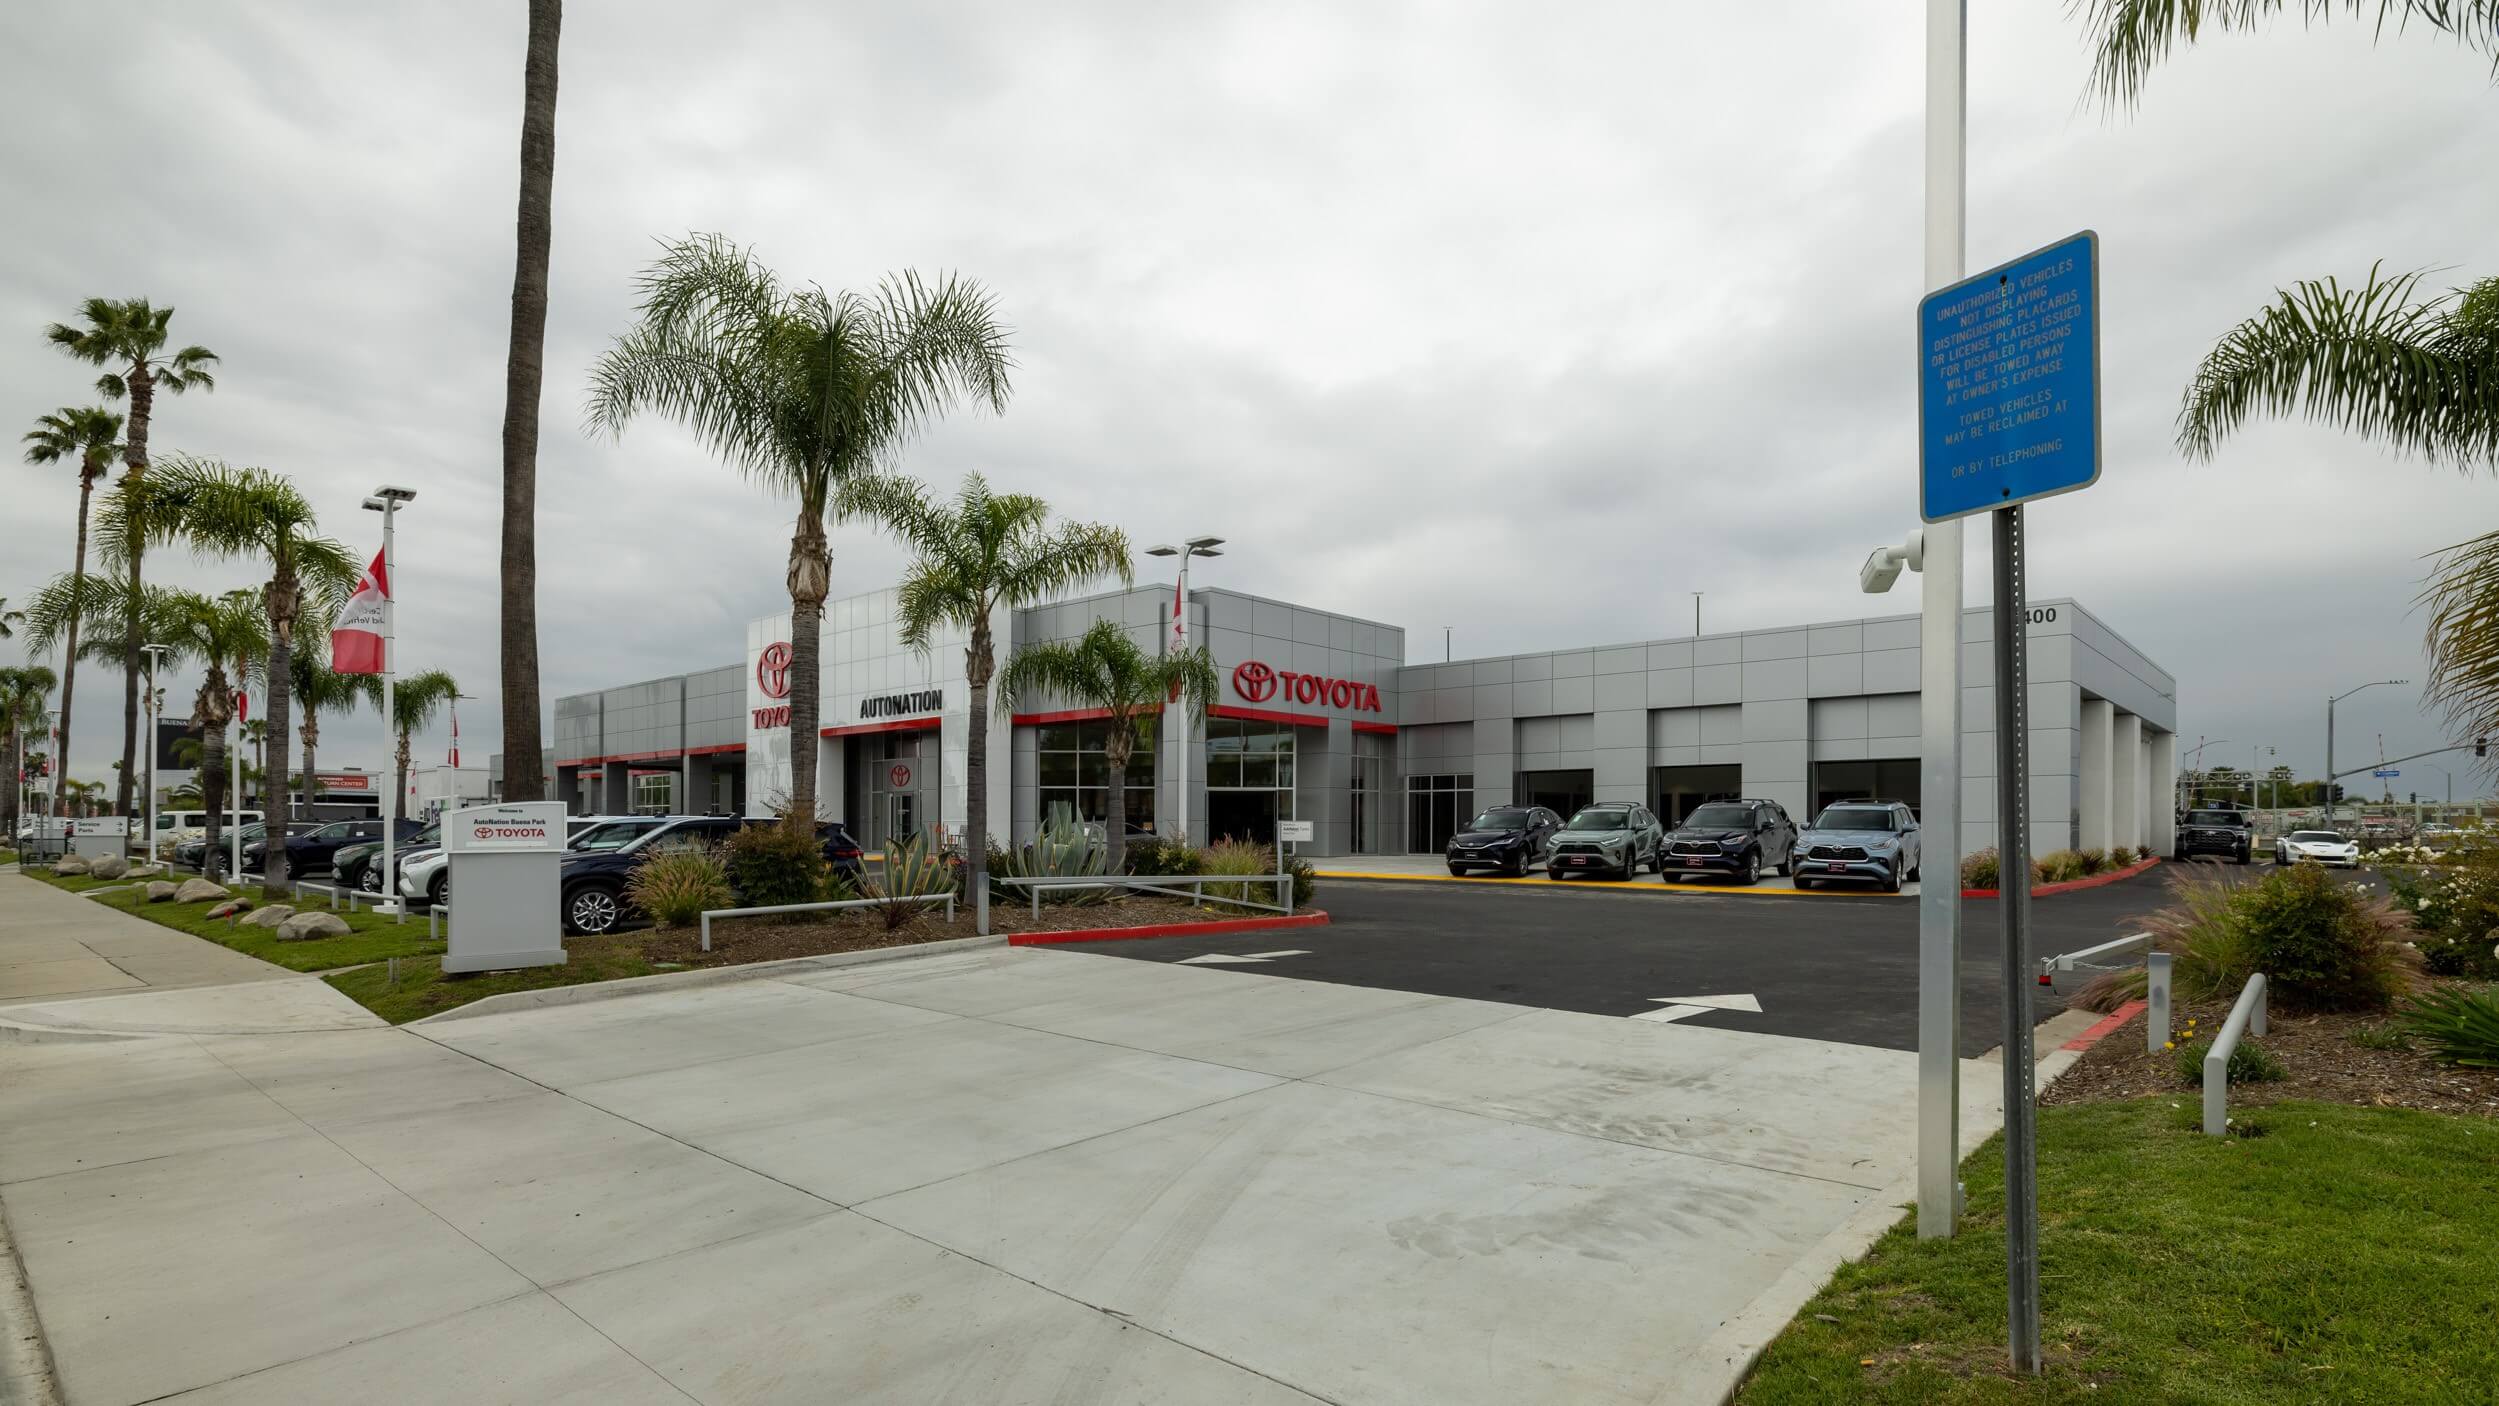 Exterior view of AutoNation Toyota Buena Park's driveway, cars parked on the lot